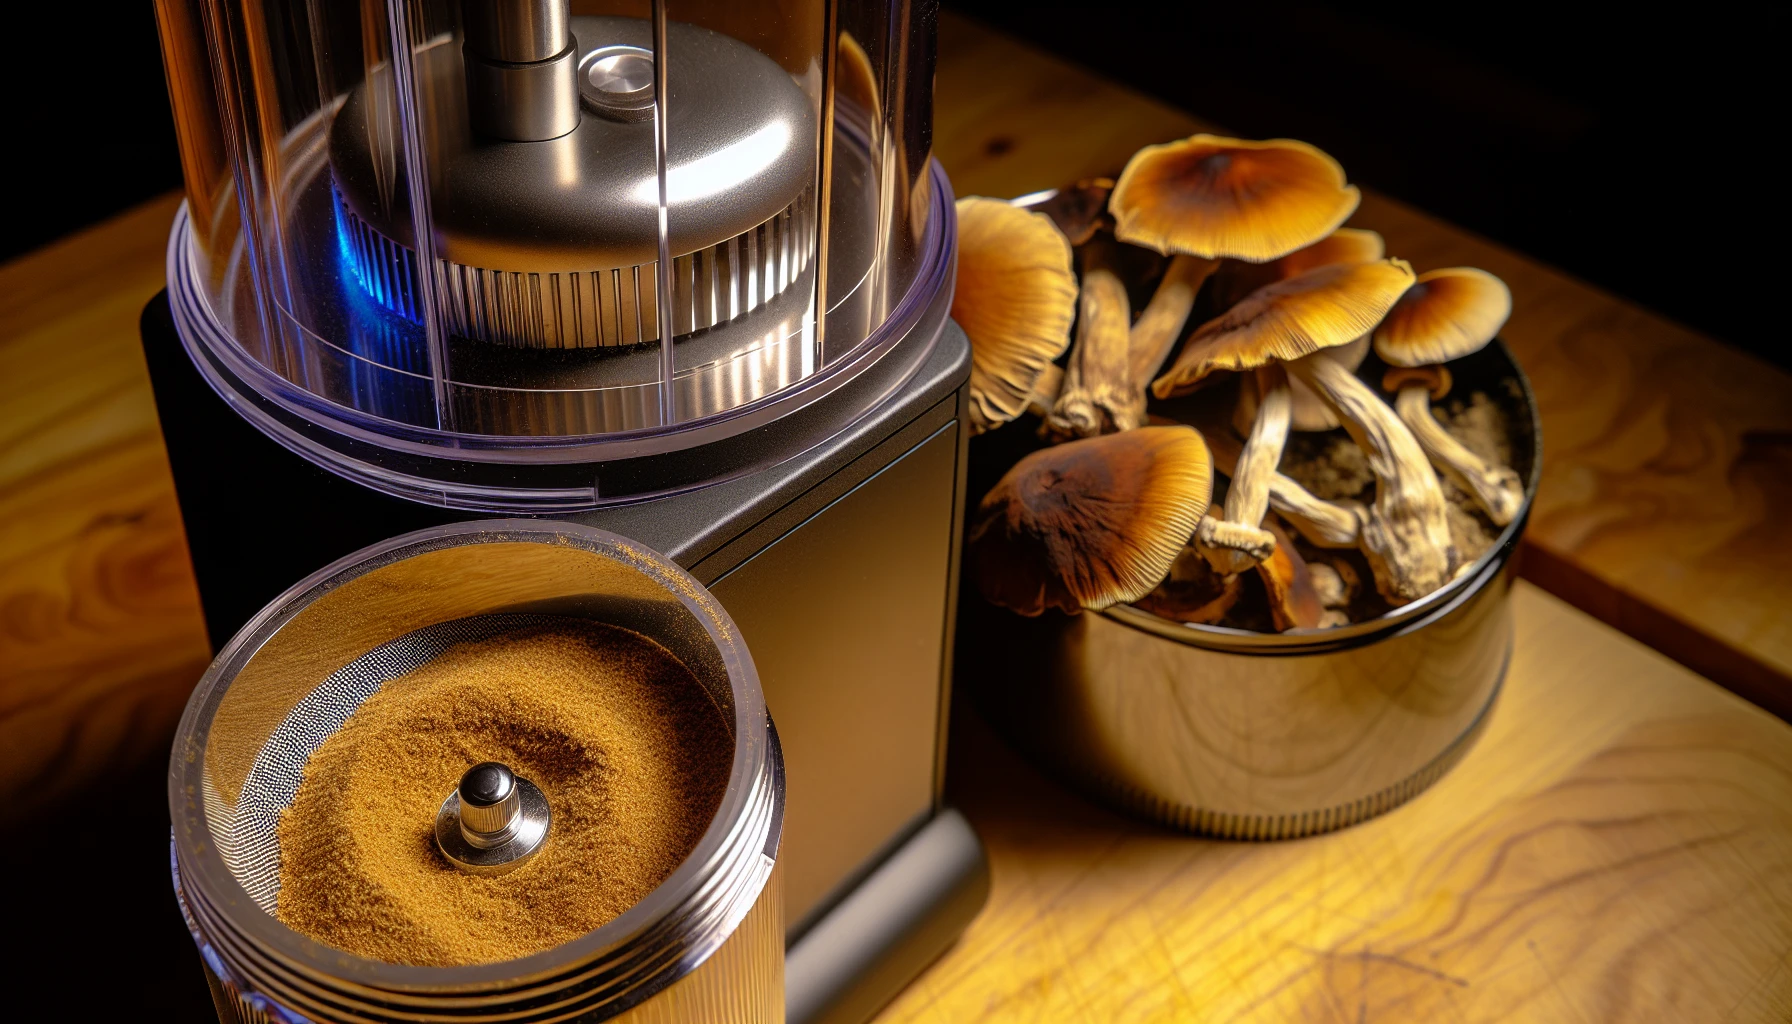 Dried magic mushrooms and a coffee grinder